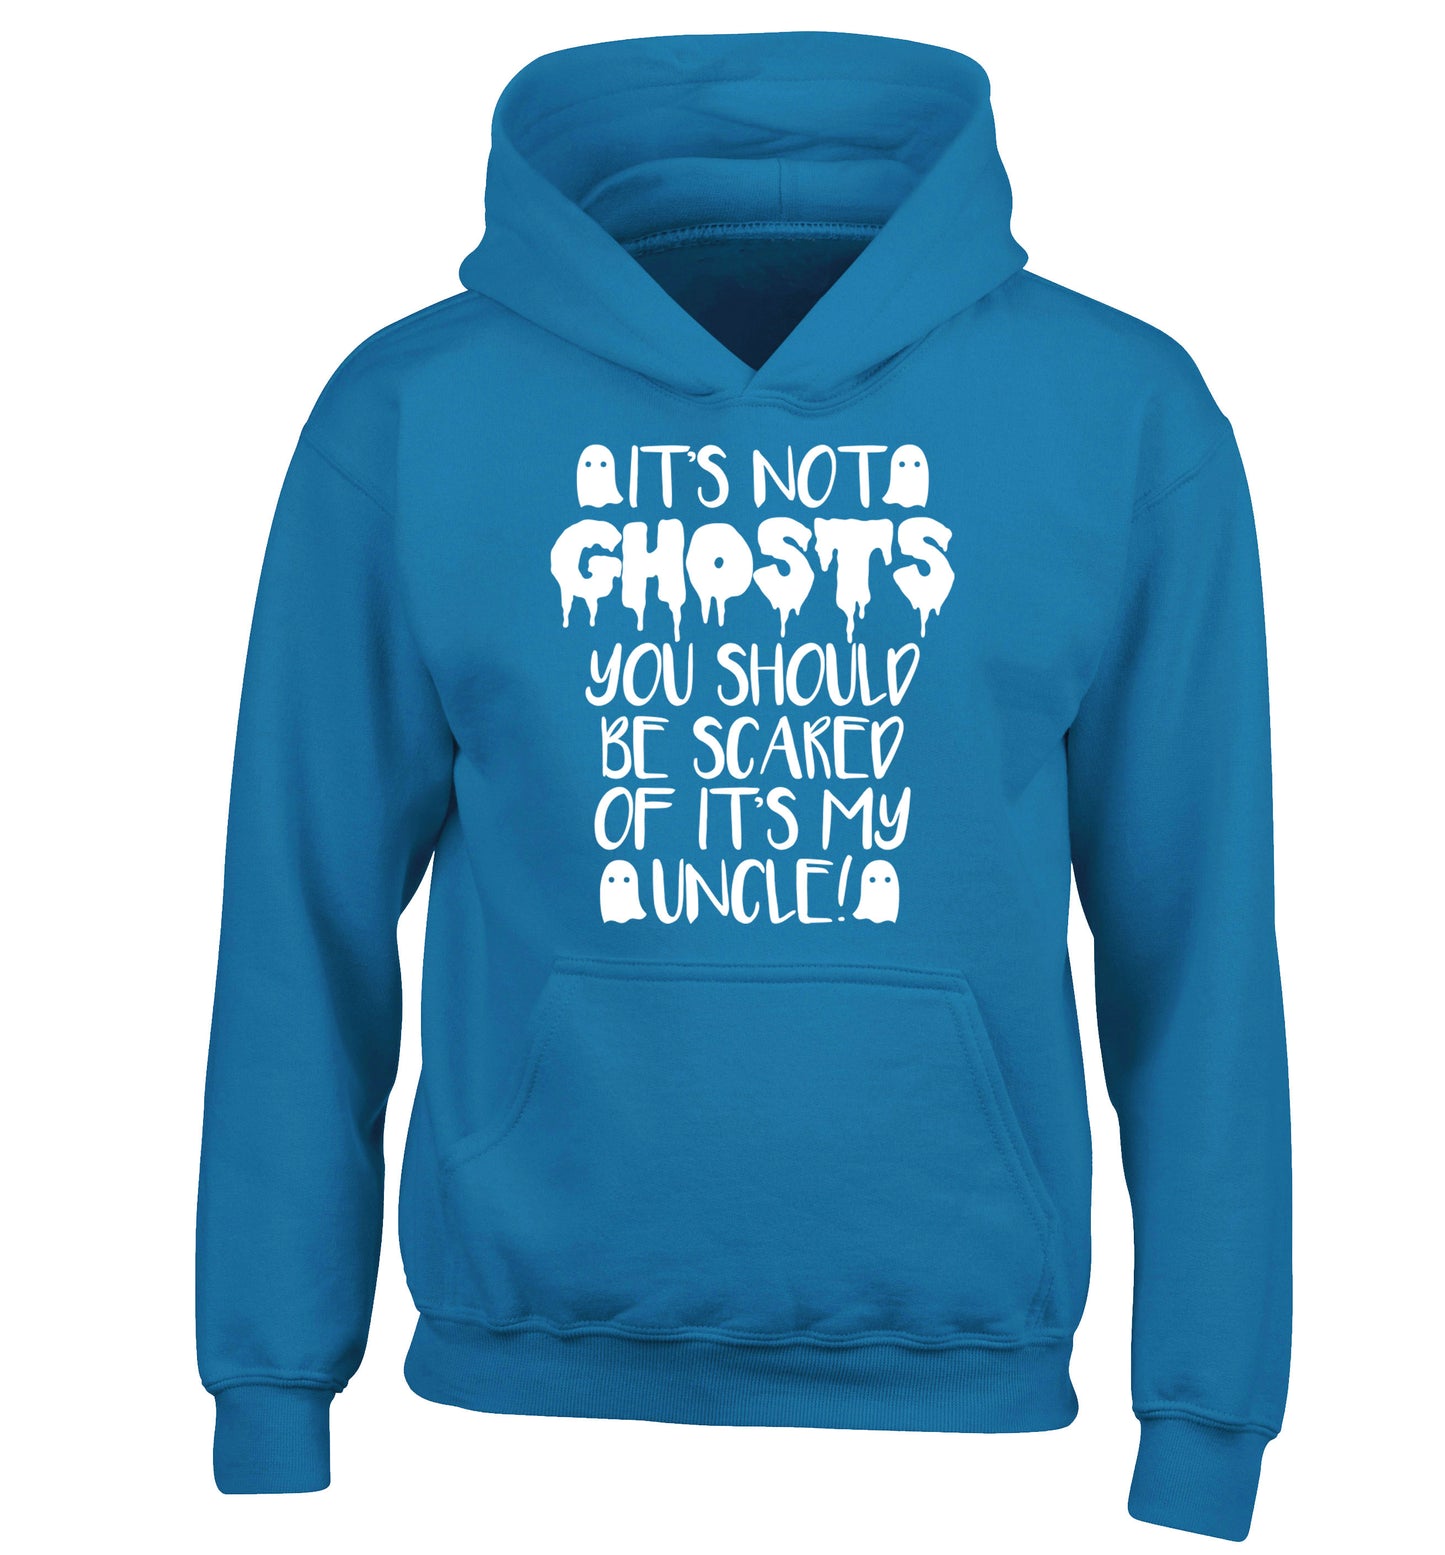 It's not ghosts you should be scared of it's my uncle! children's blue hoodie 12-14 Years